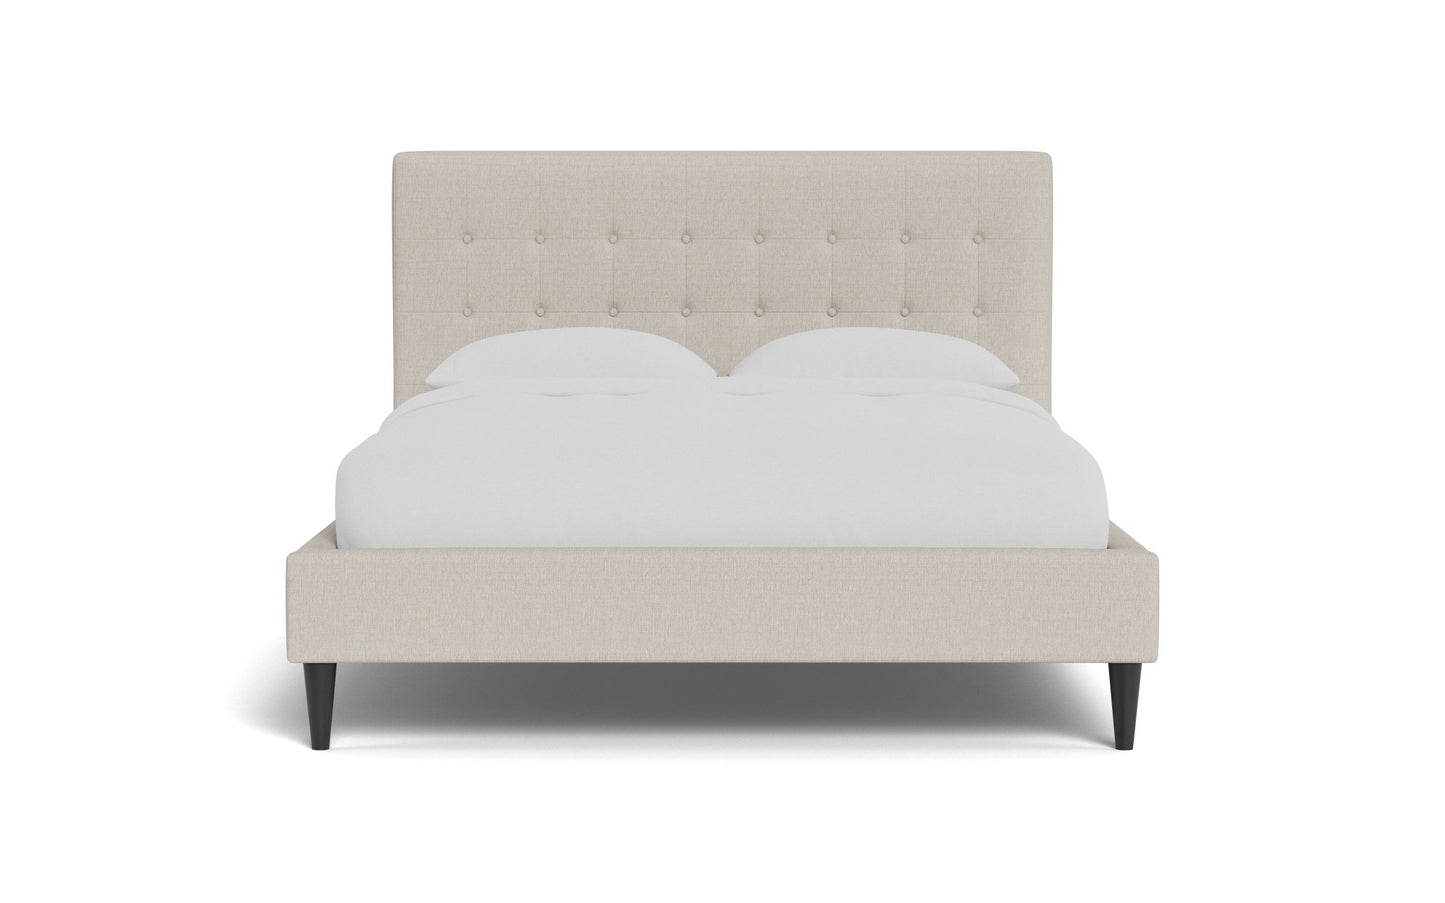 Wallace King Tufted Upholstered Bed